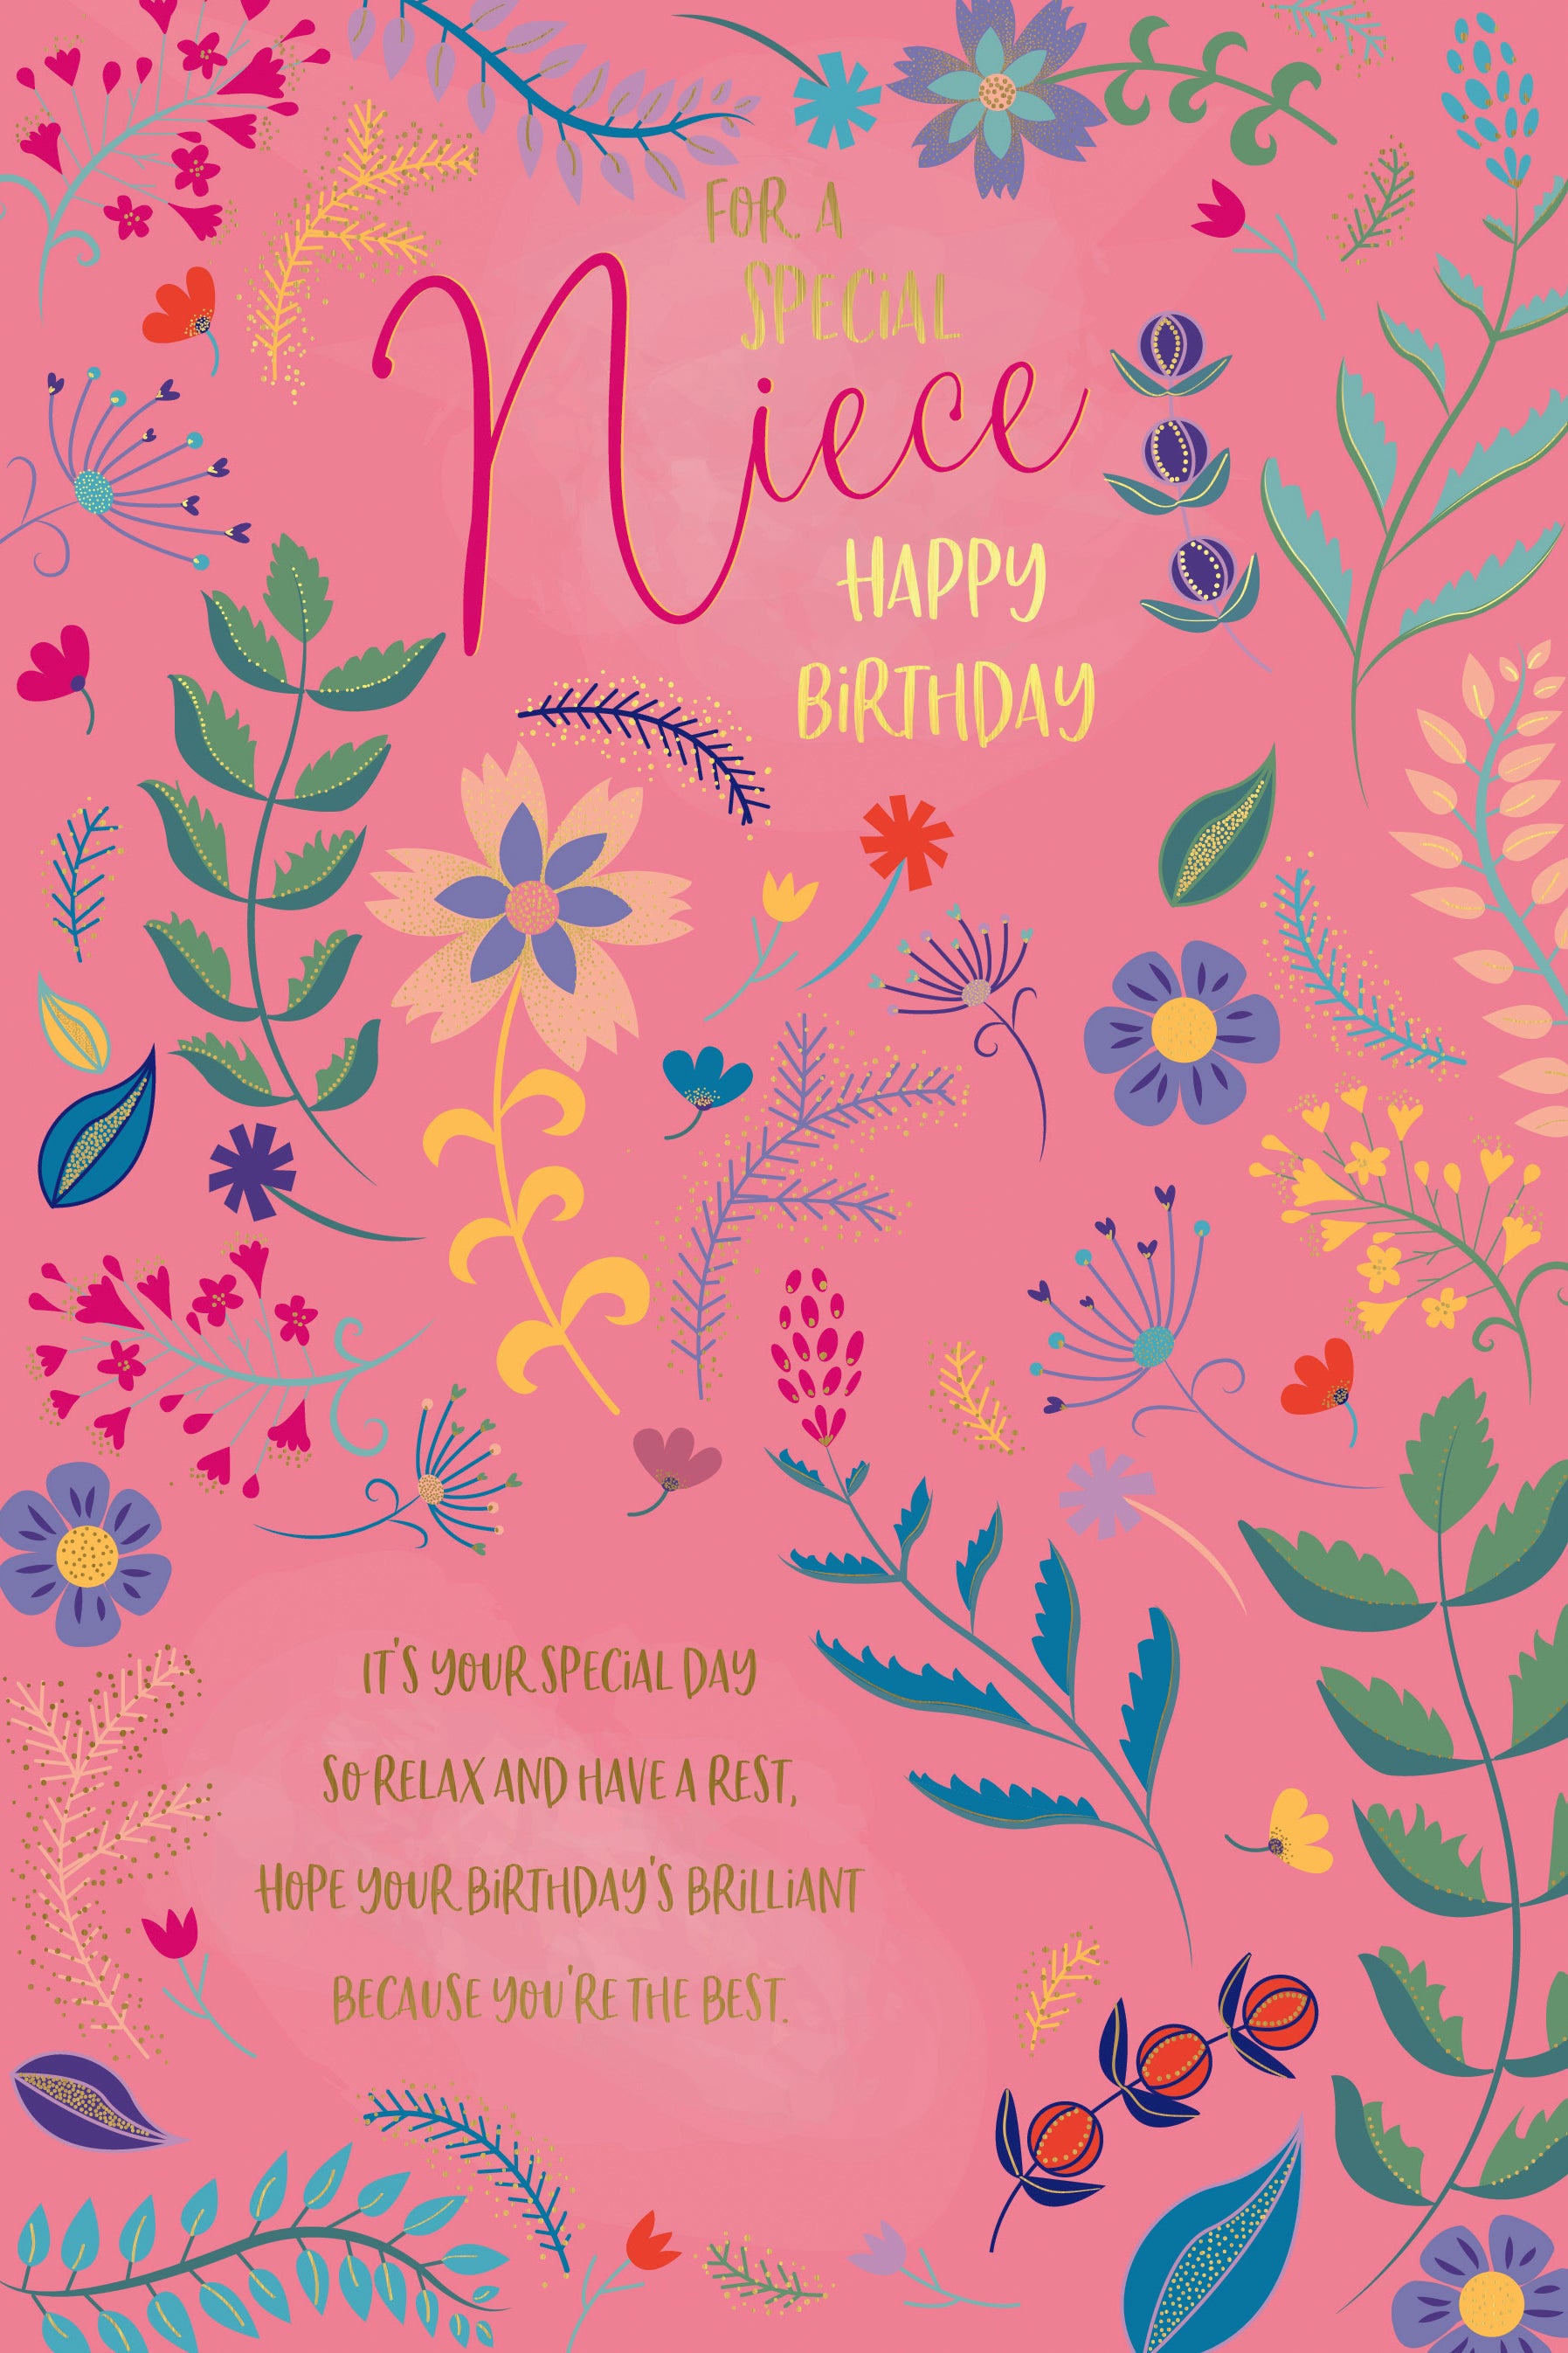 Niece Birthday Card - Florals And Leaves